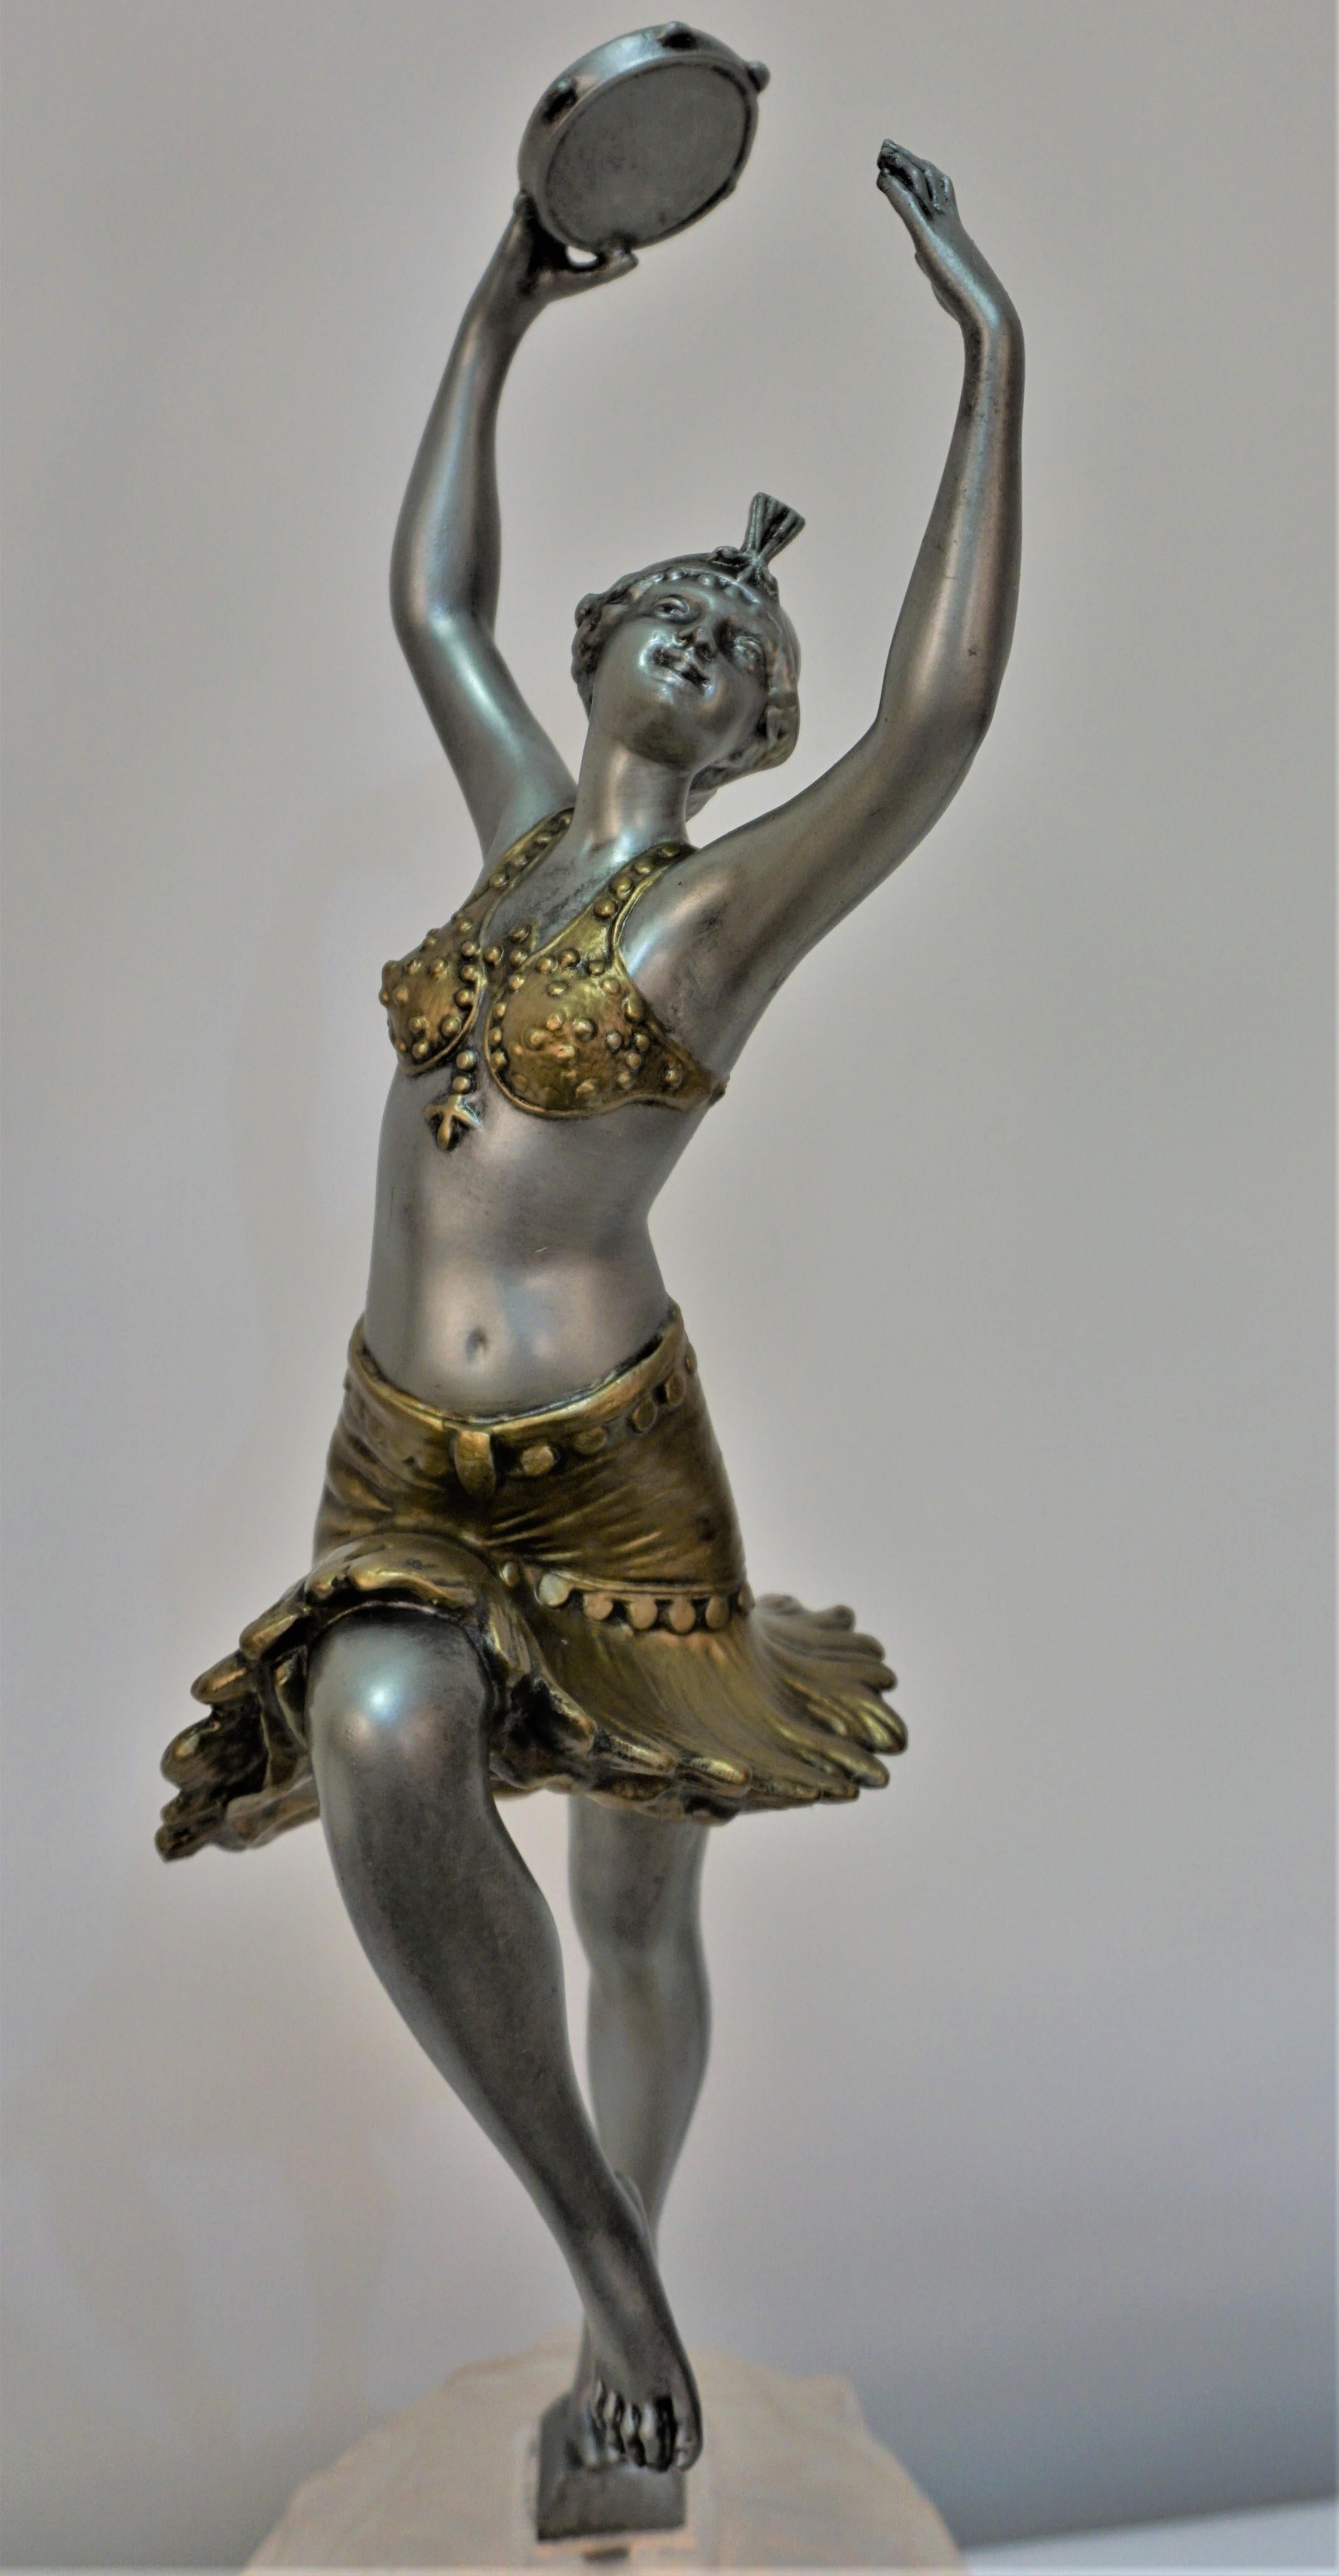 Cold-Painted French Art Deco Sculpture Table Lamp Tambourine Dancer